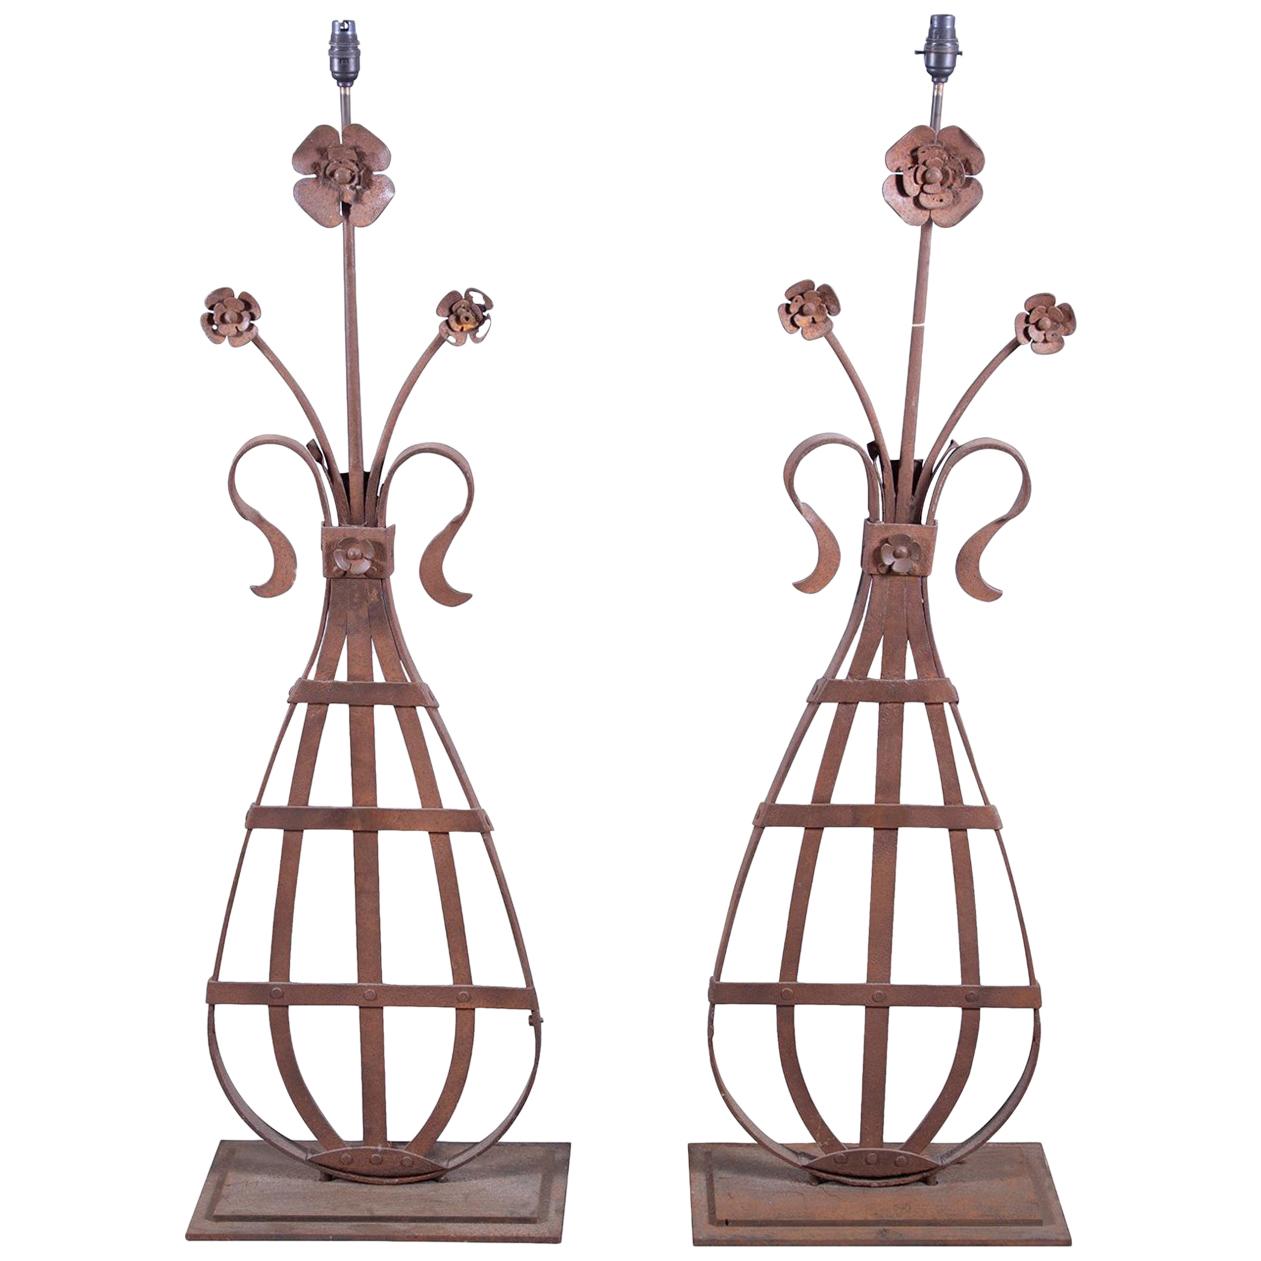 Pair of 19th Century French Architectural Lamps